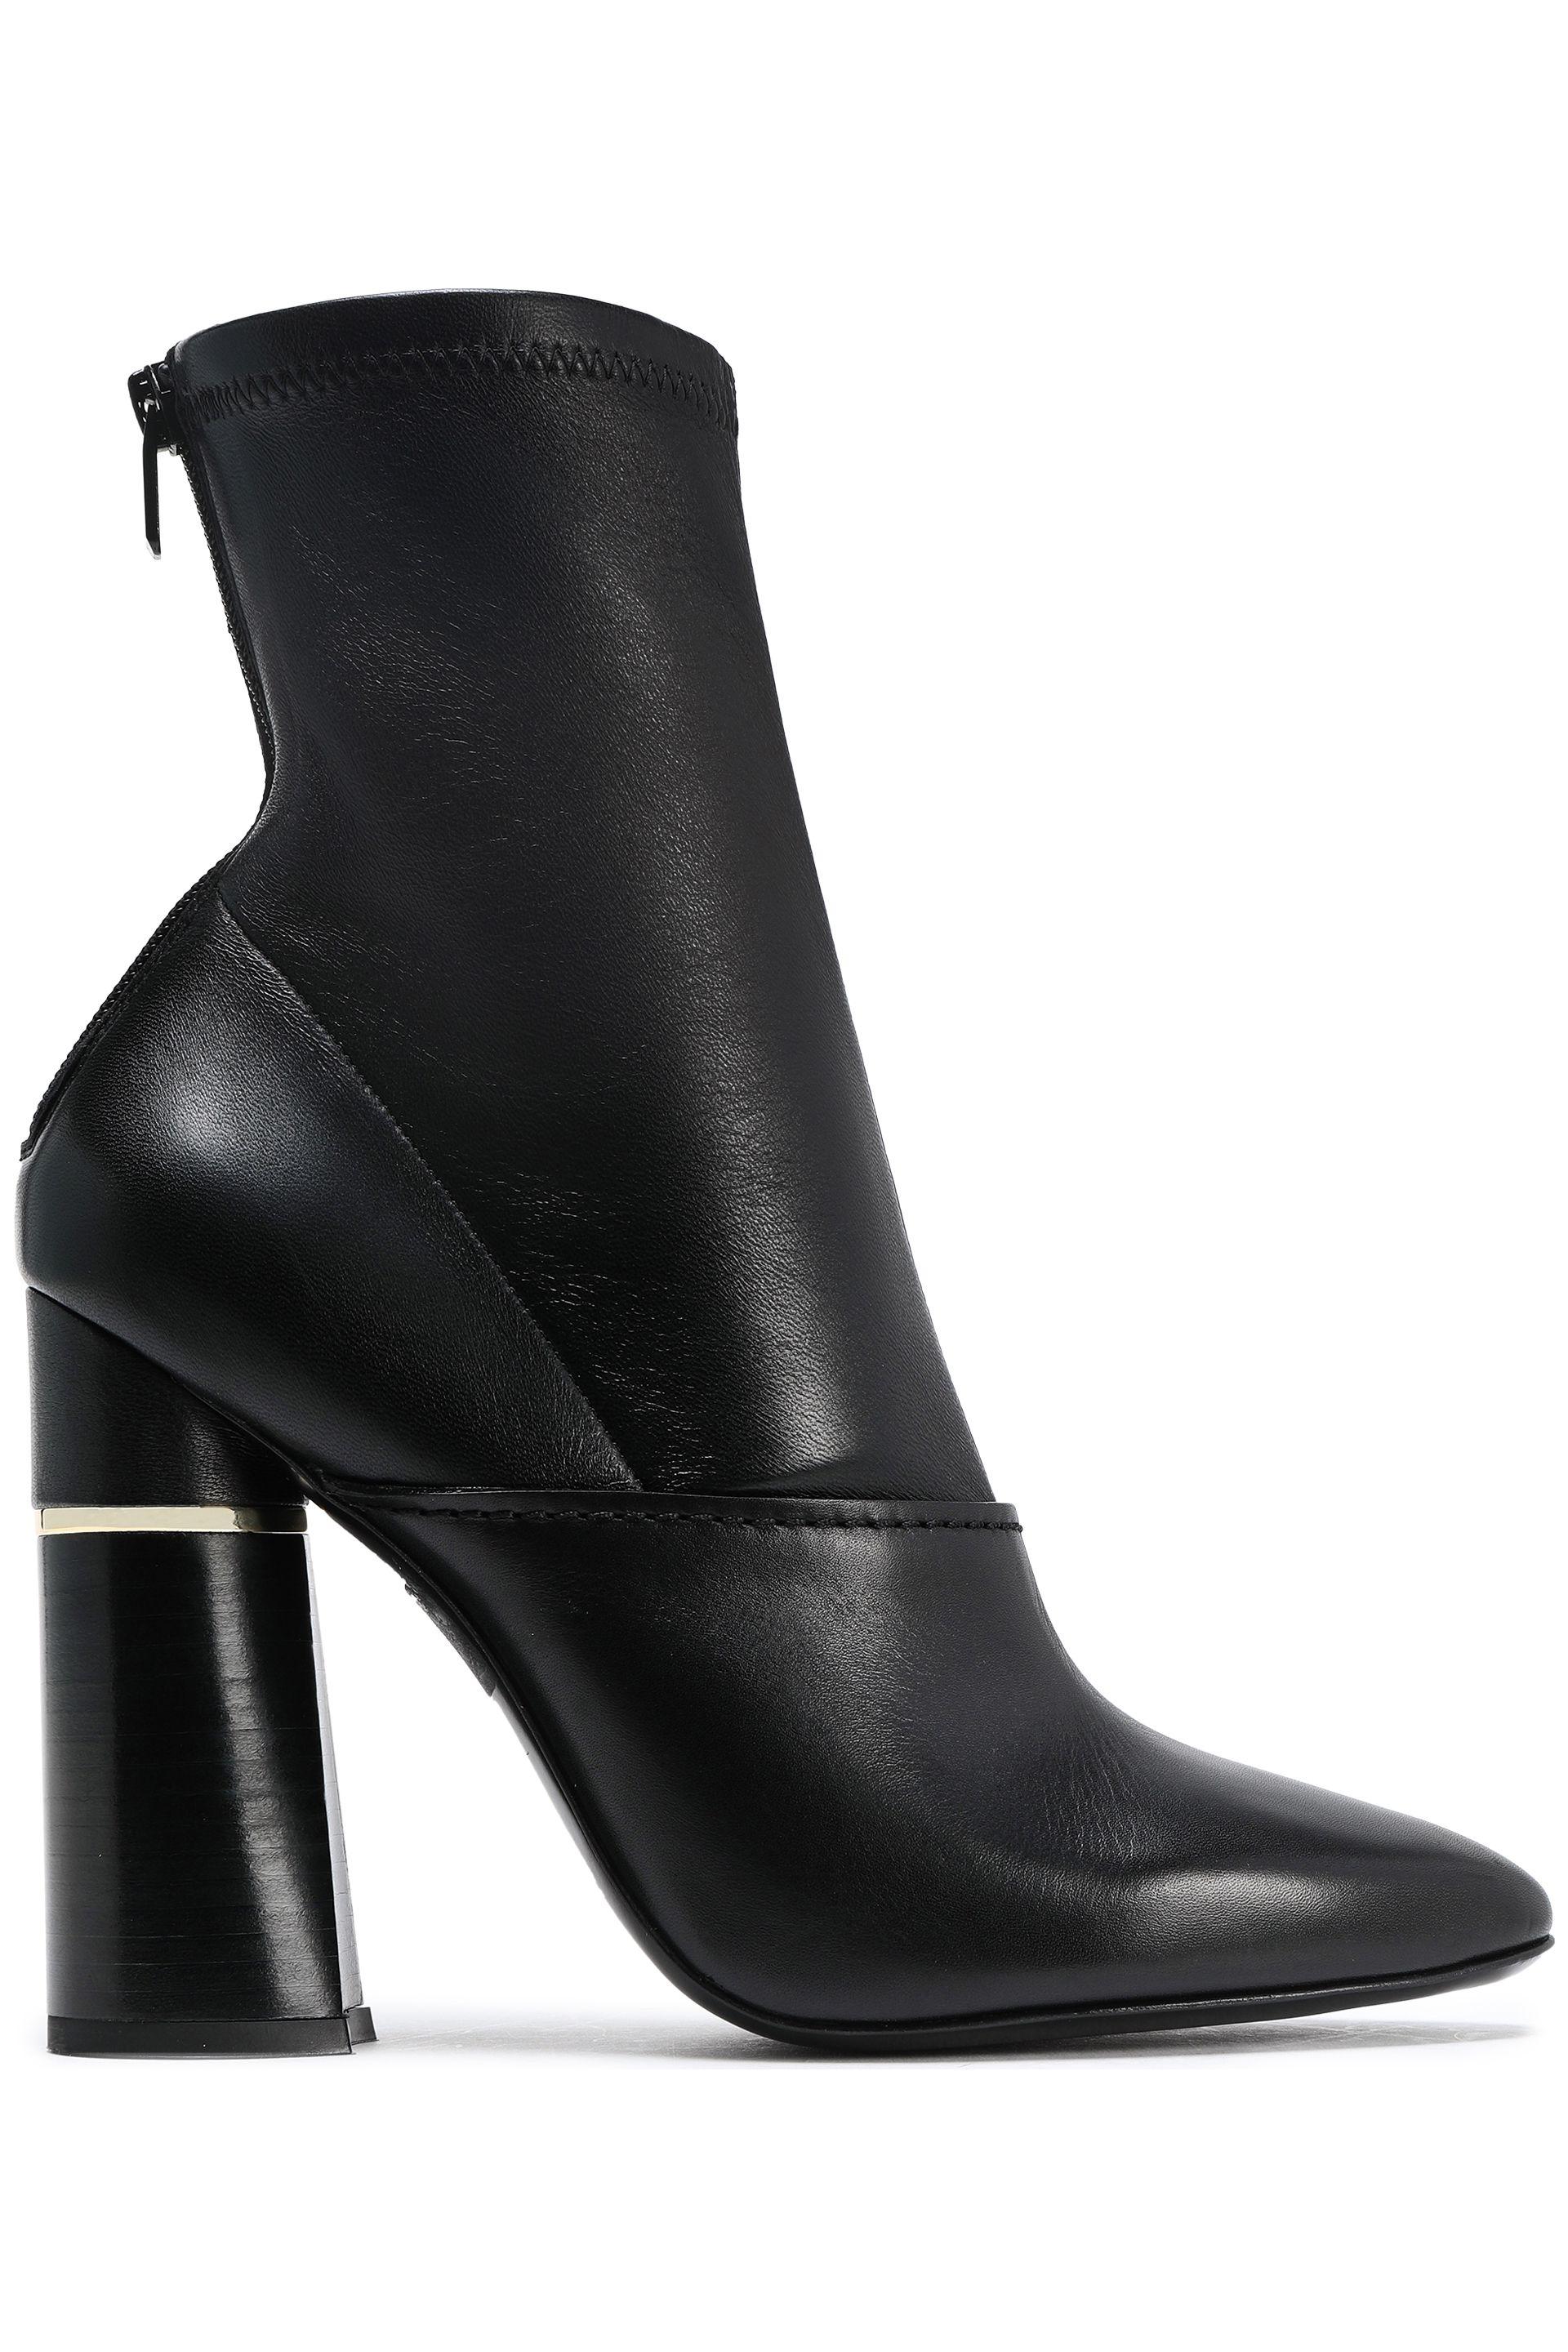 Lyst - 3.1 Phillip Lim Woman Kyoto Stretch-leather Ankle Boots Black in ...